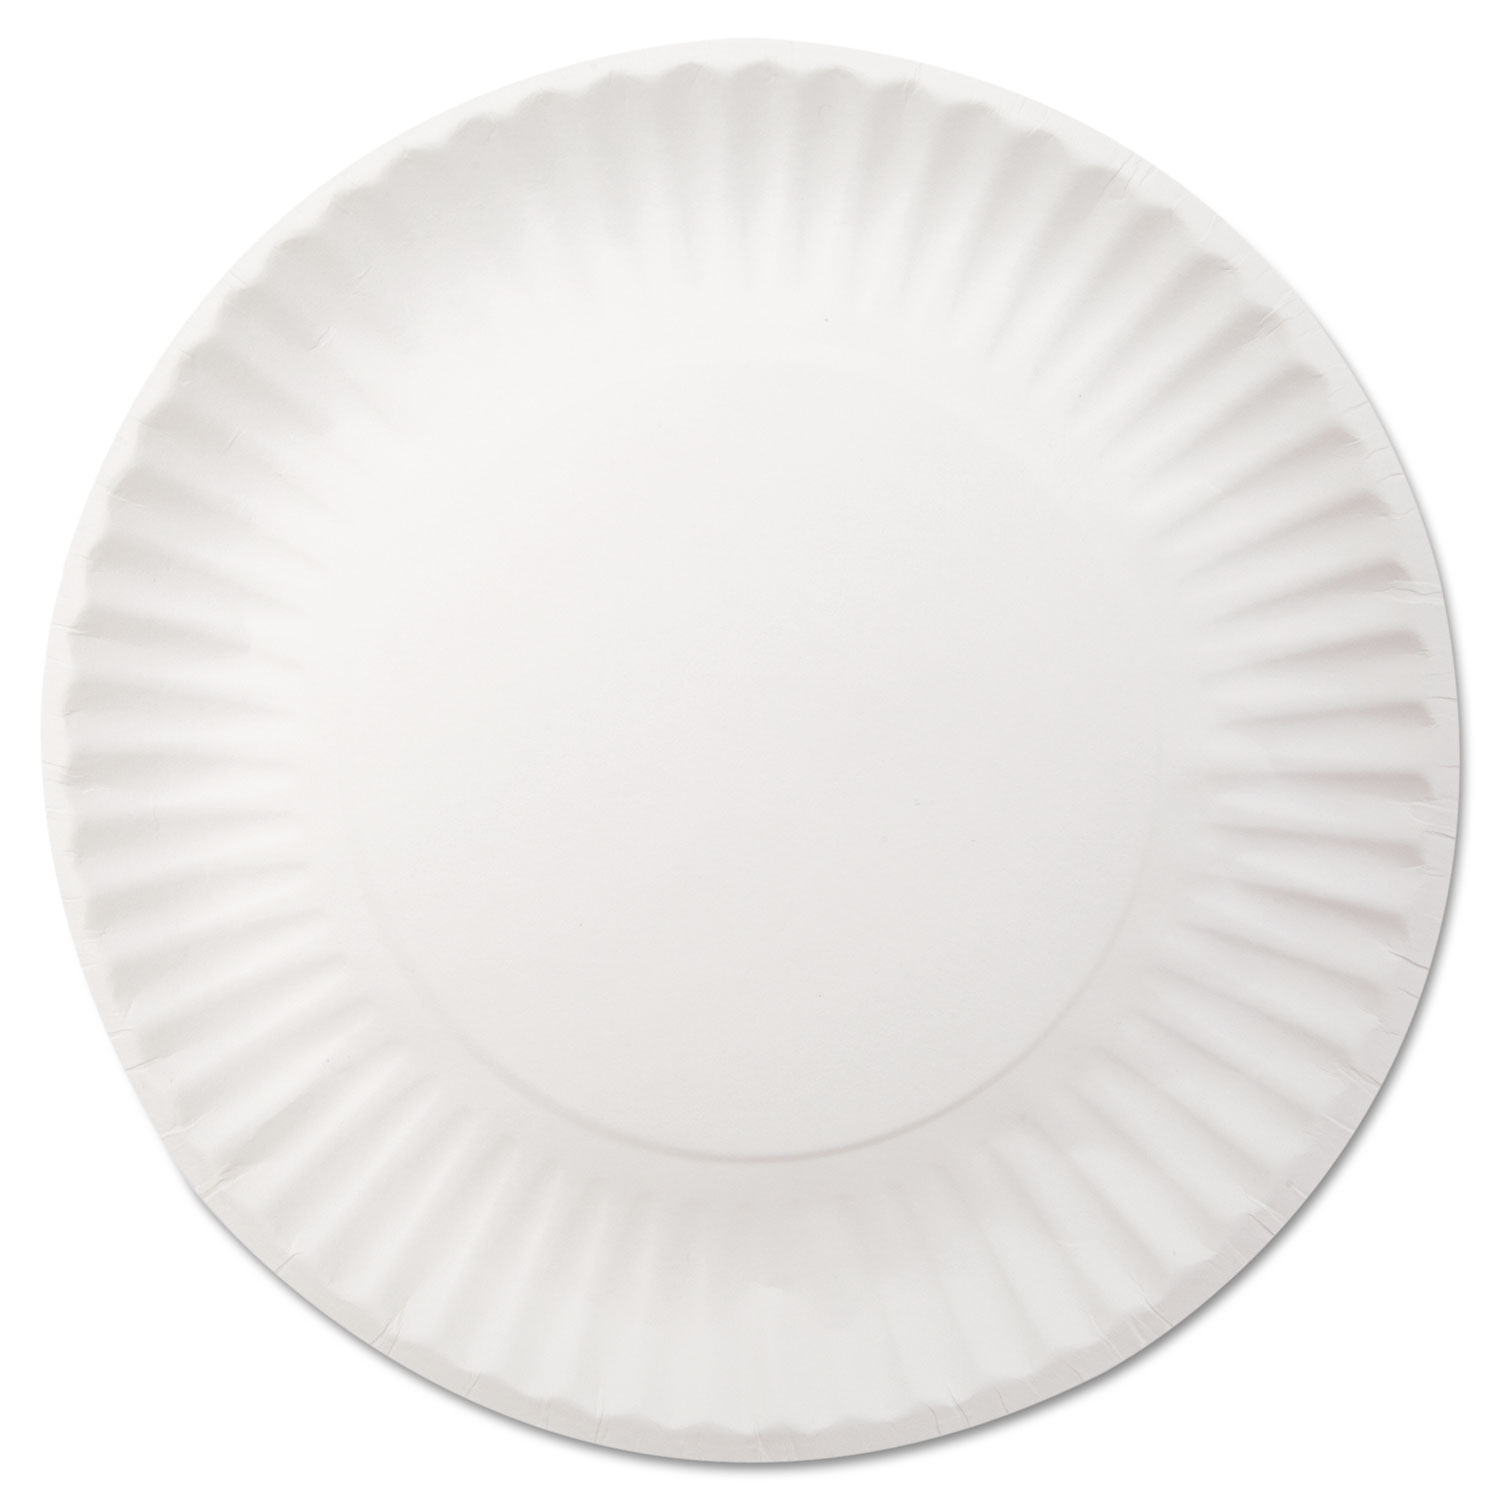  Dixie WNP9OD White Paper Plates, 9 dia, 250/Pack, 4 Packs/Carton (DXEWNP9OD) 